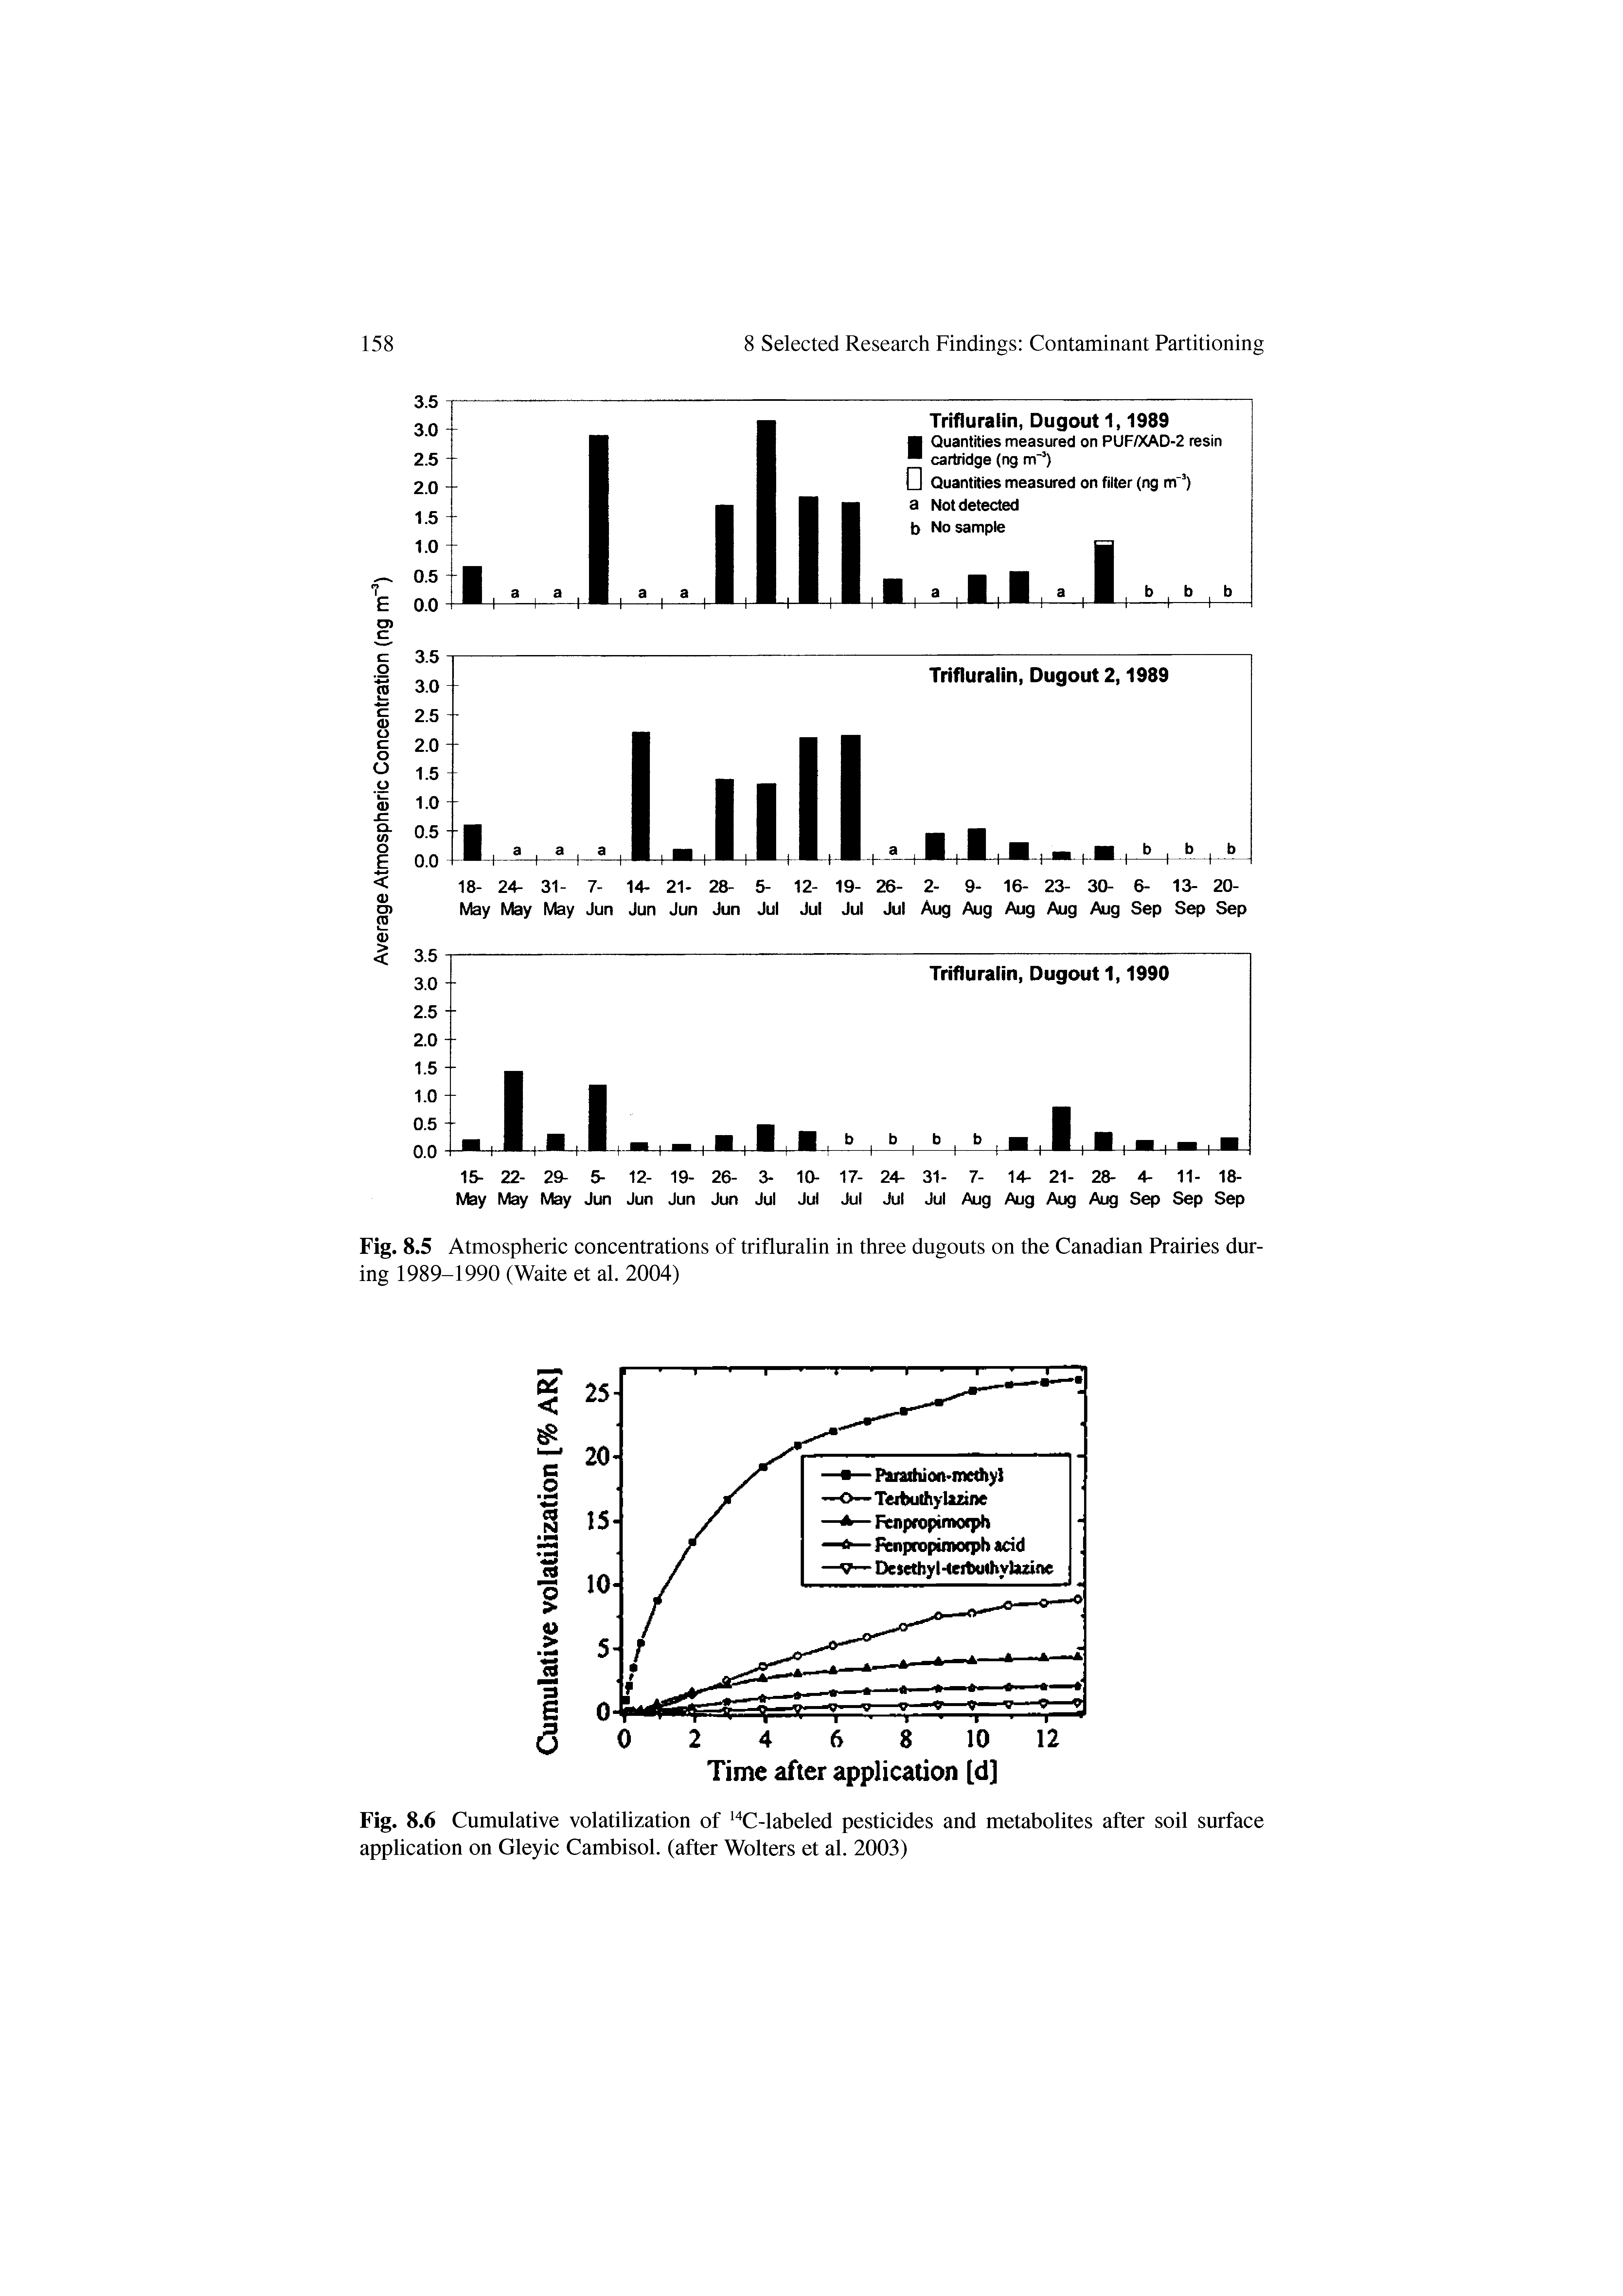 Fig. 8.6 Cumulative volatilization of " C-labeled pesticides and metabolites after soil surface application on Gleyic Cambisol. (after Wolters et al. 2003)...